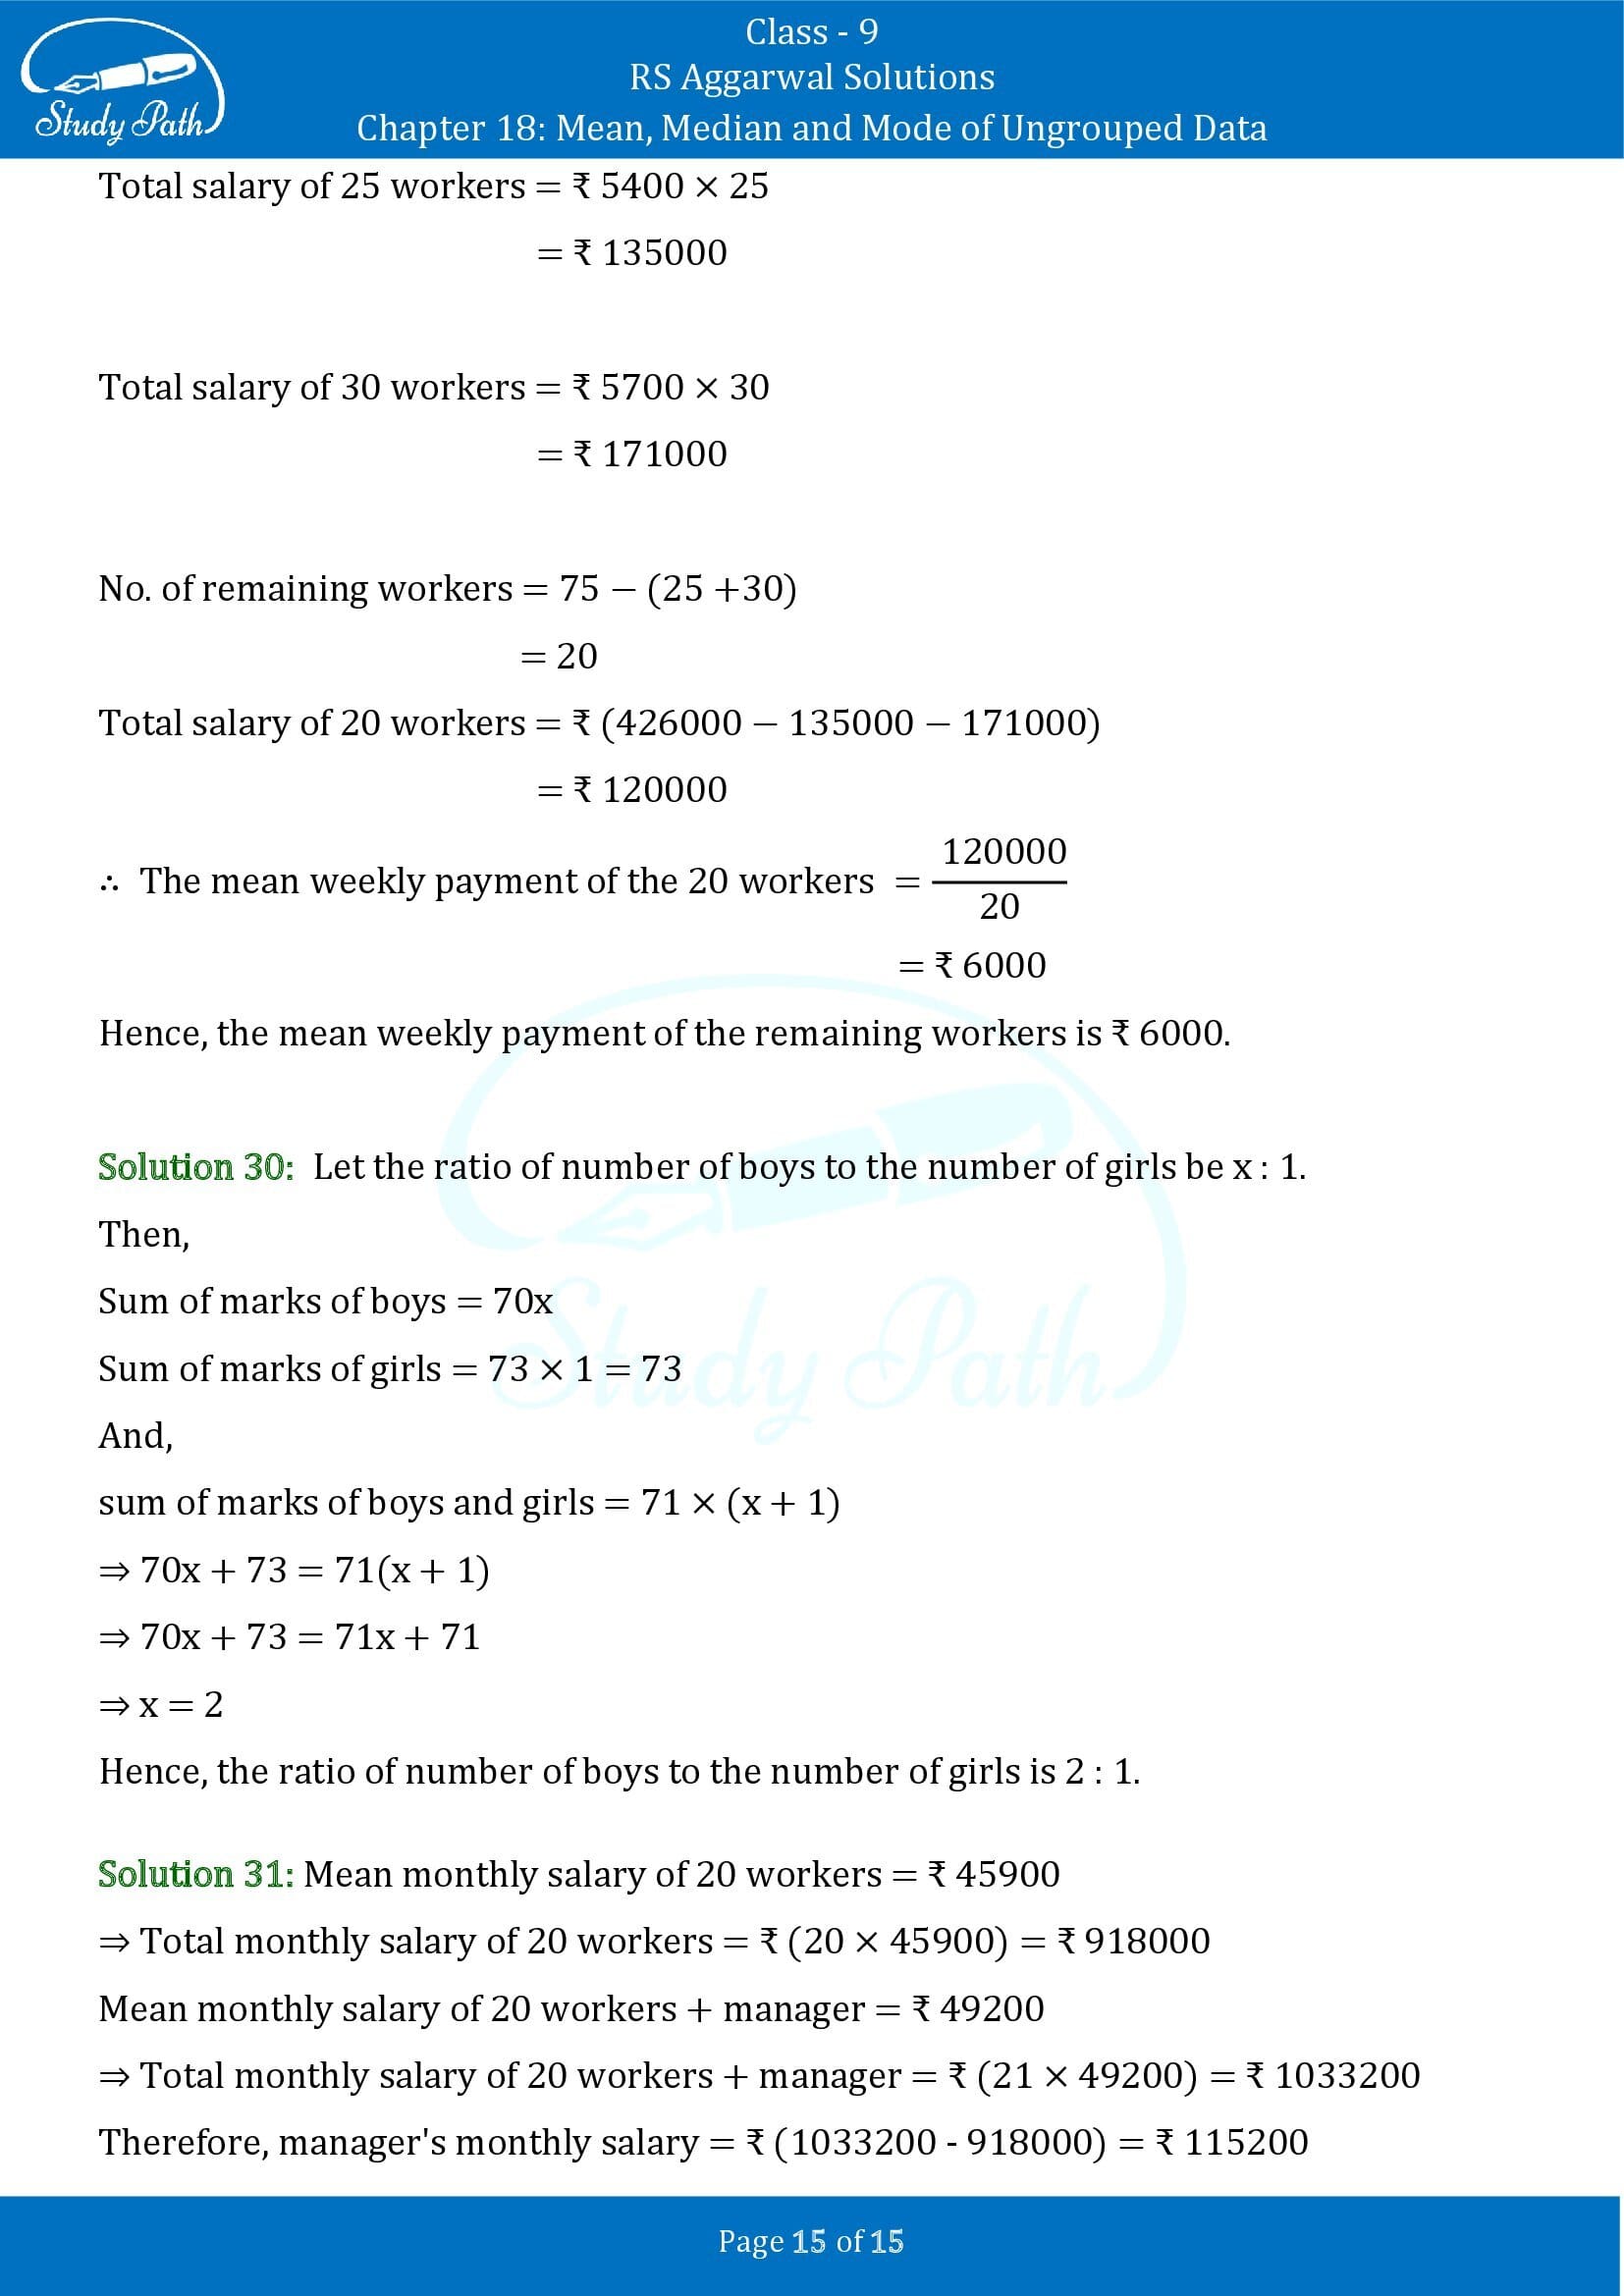 RS Aggarwal Solutions Class 9 Chapter 18 Mean Median and Mode of Ungrouped Data Exercise 18A 00015